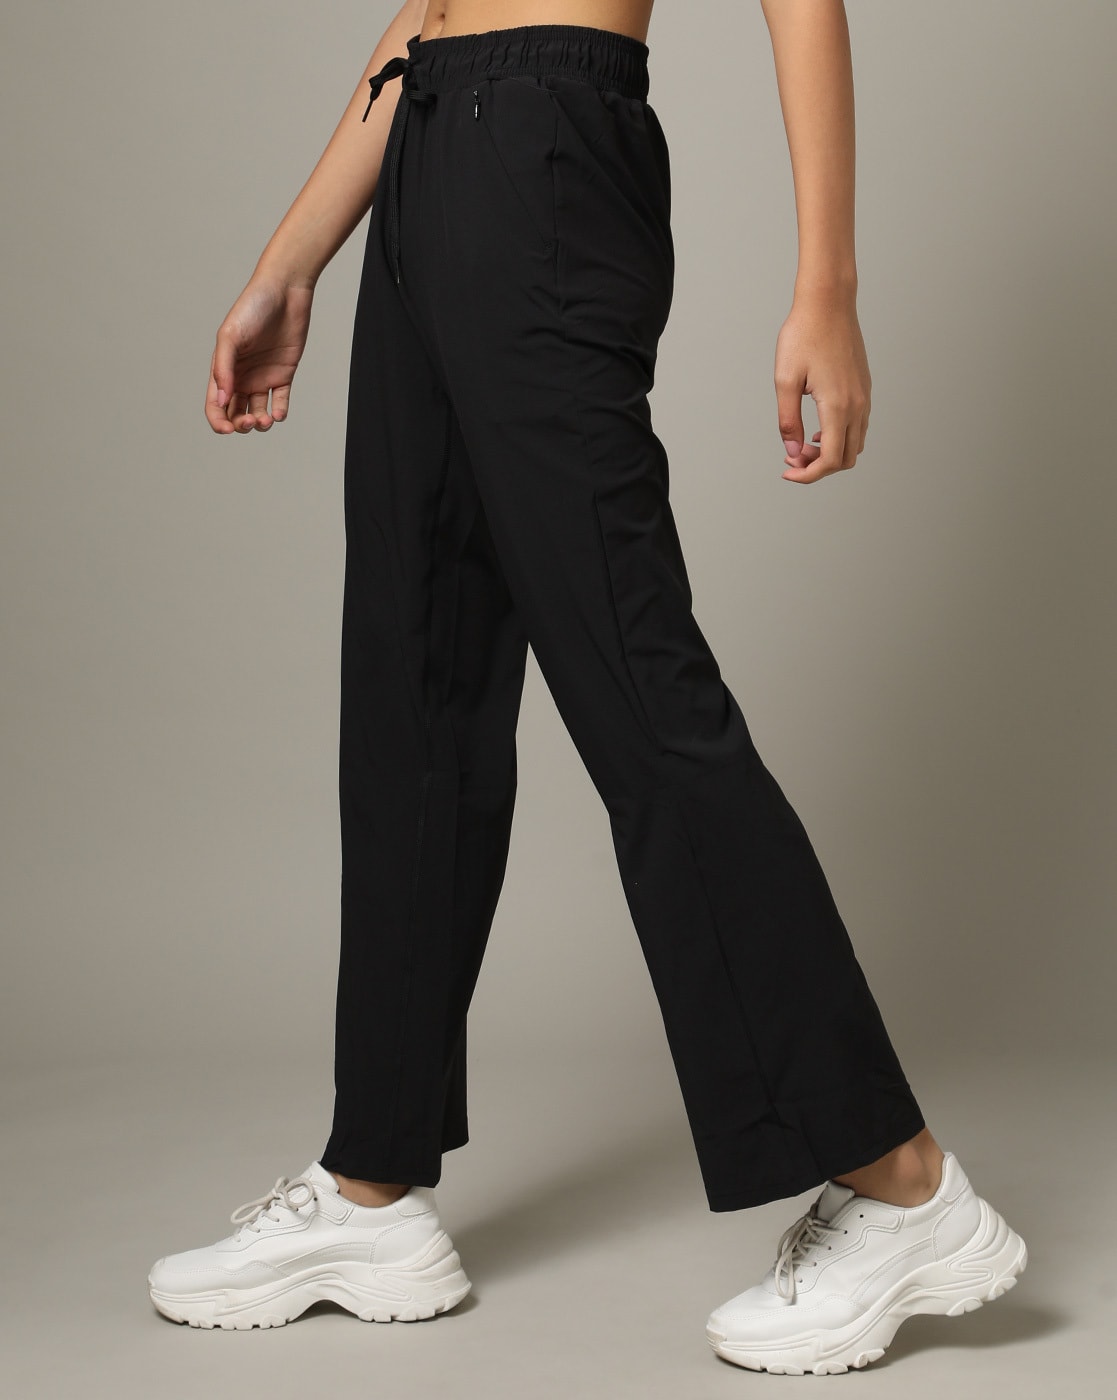 PUMA Modest Activewear Wide Leg Solid Women Black Track Pants - Buy PUMA  Modest Activewear Wide Leg Solid Women Black Track Pants Online at Best  Prices in India